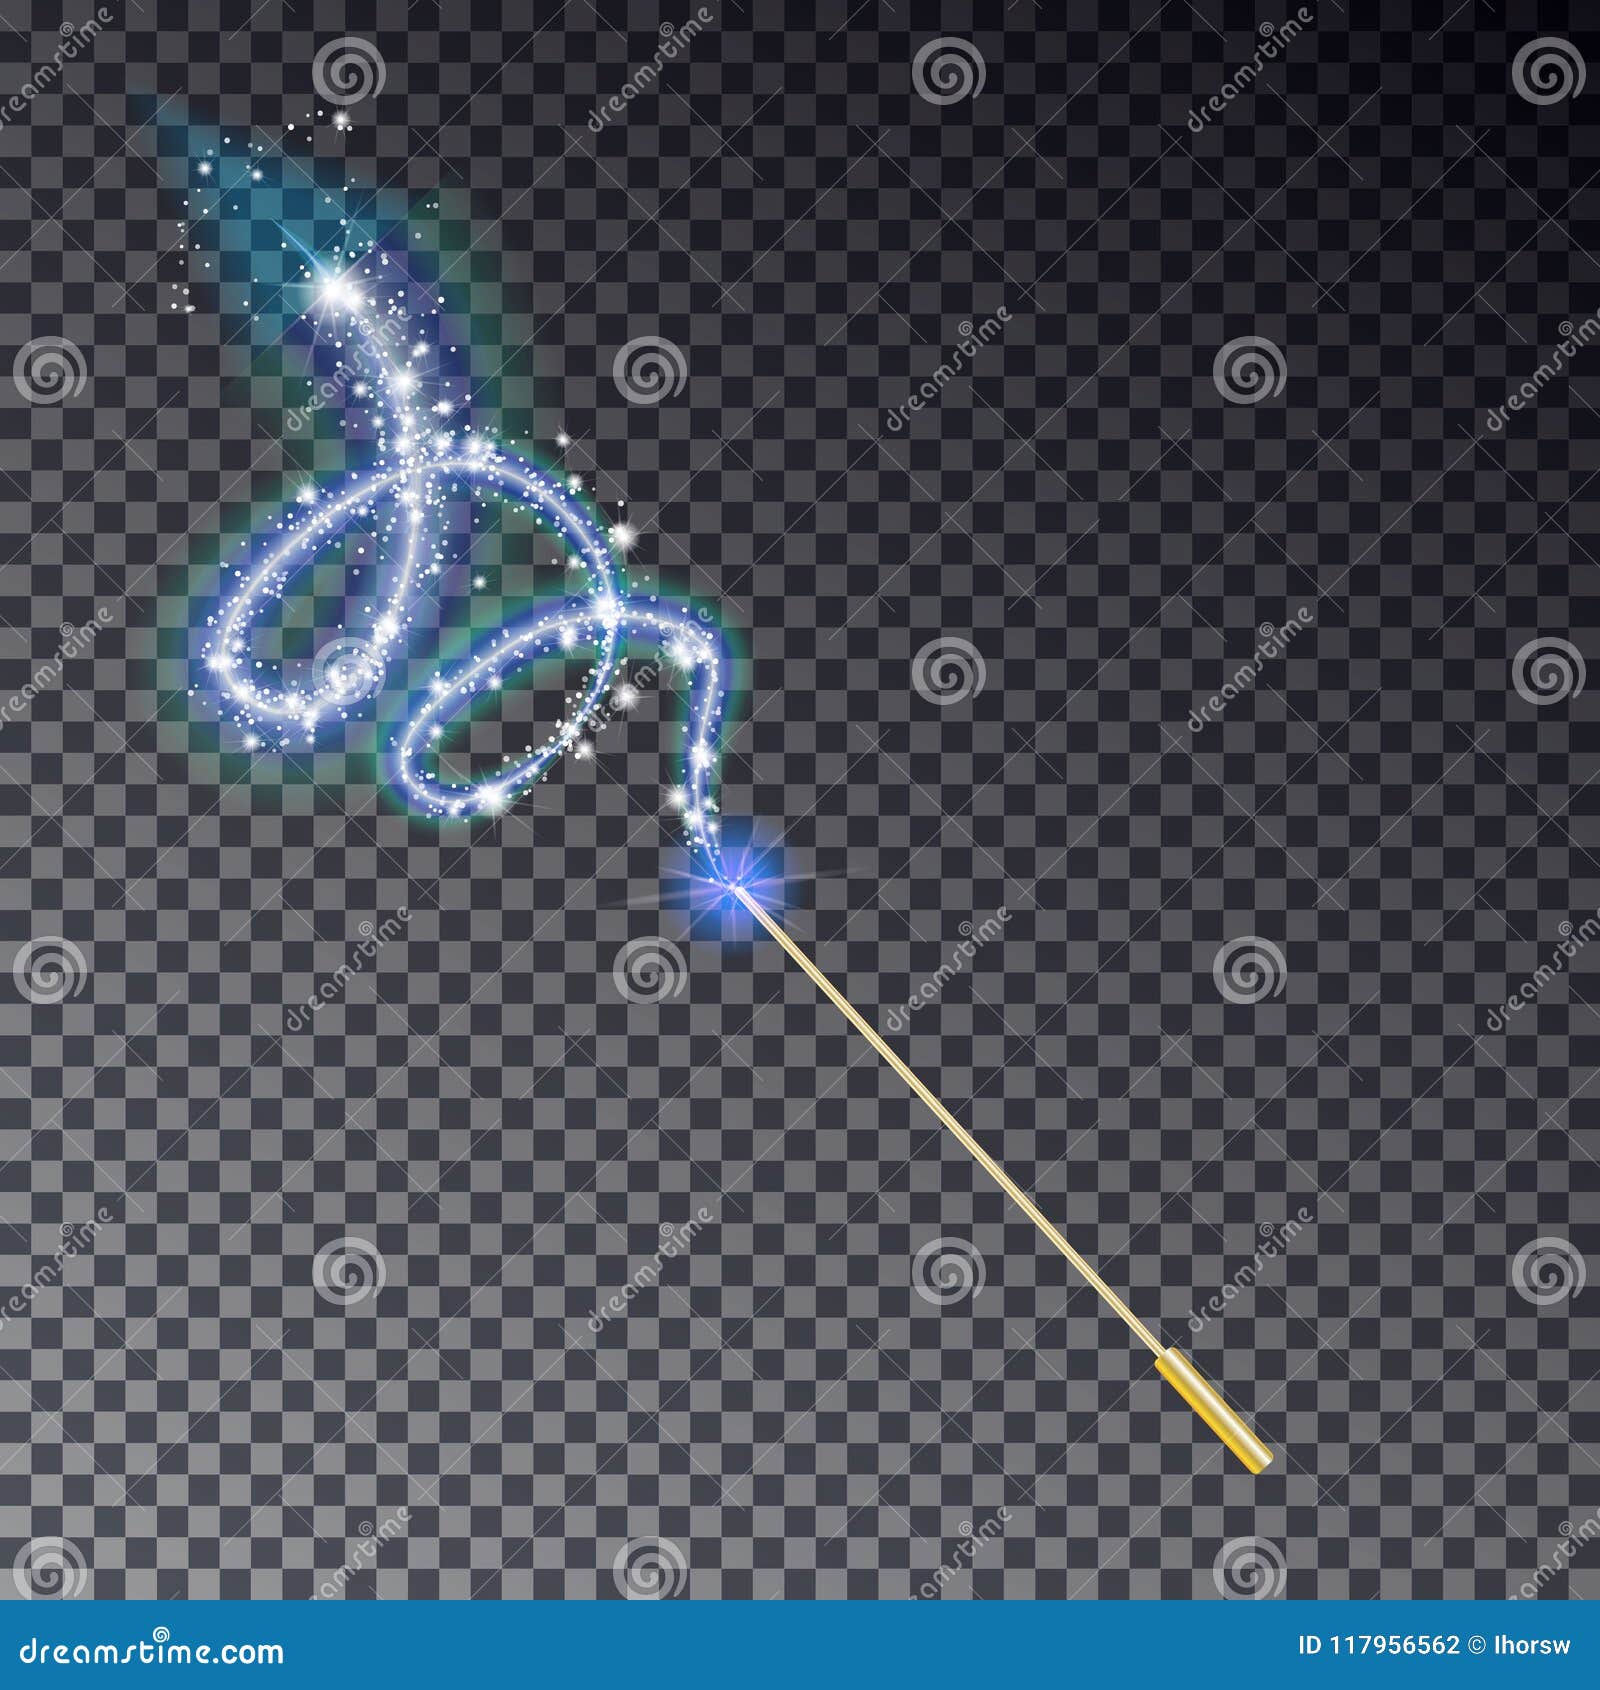 How to Great Glitter Patterns with the Magic Wand Tool 